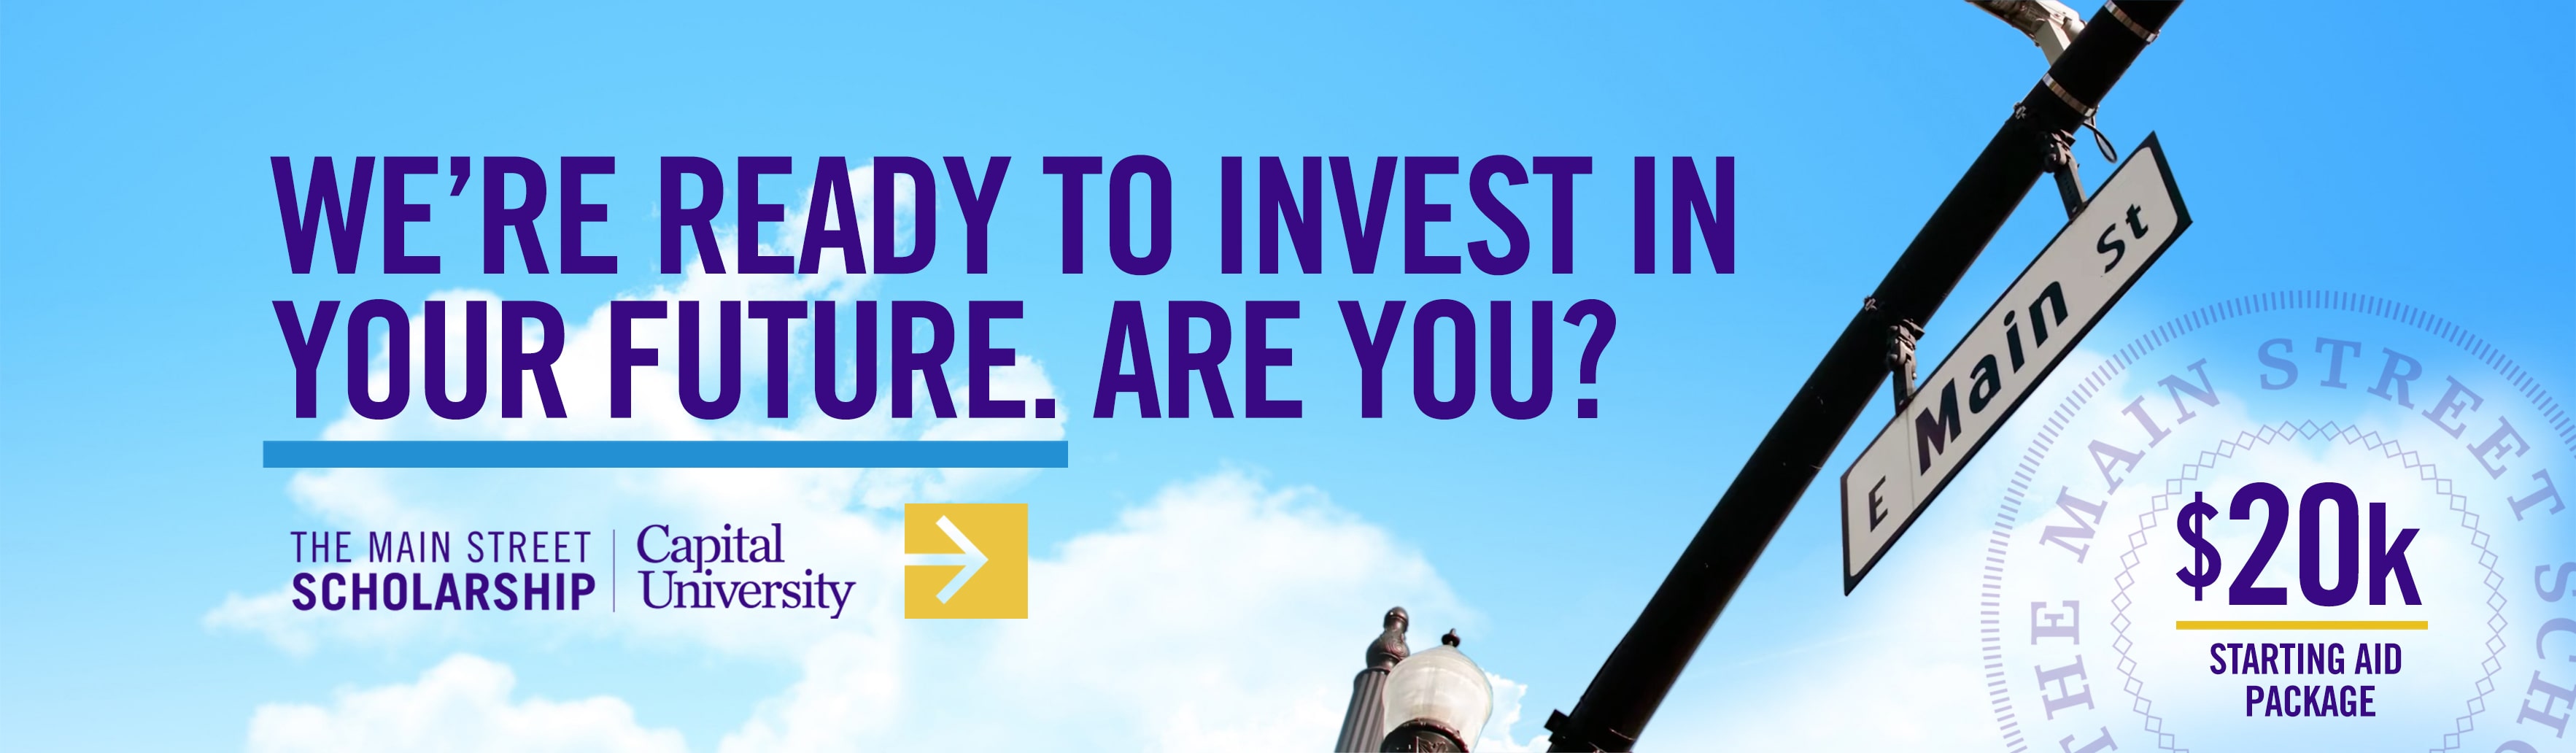 We're ready to invest in your future. Are you? The main street scholarship at Capital University.